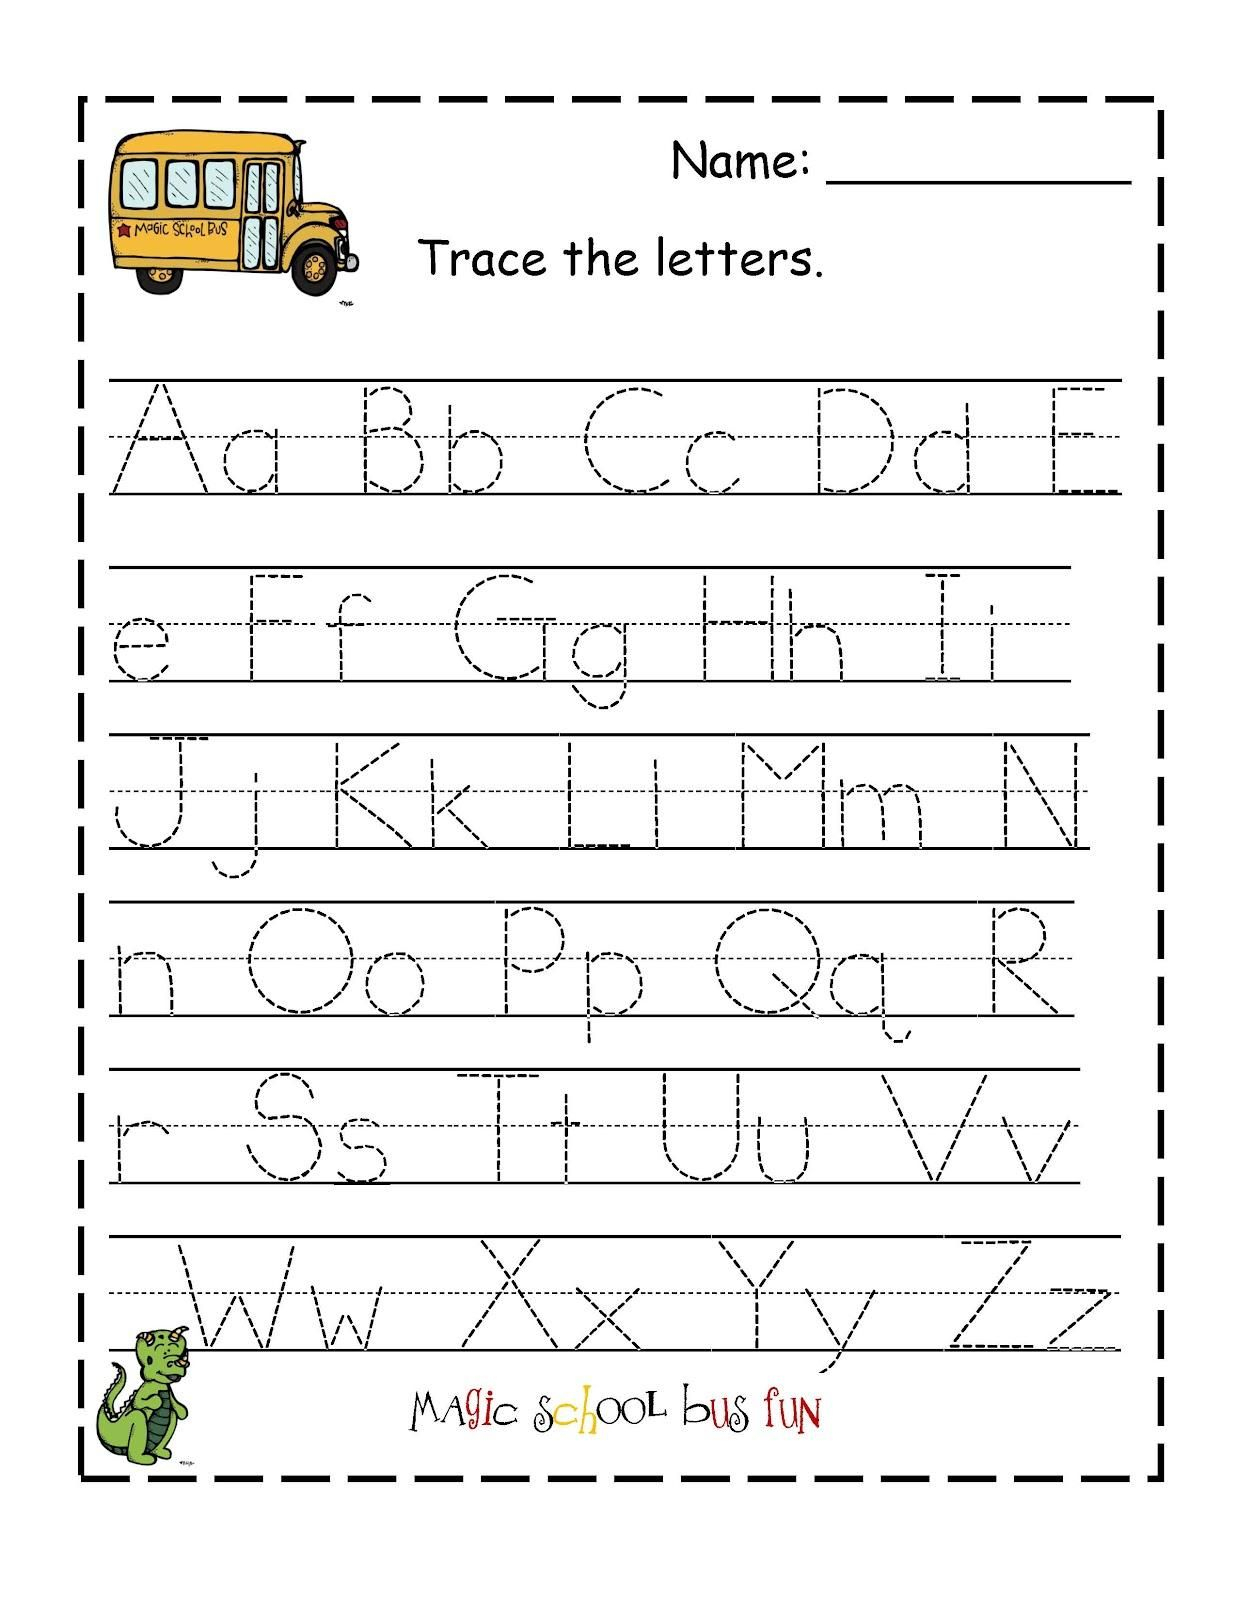 Coloring Book : Printable Letter Tracing Sheets For intended for Tracing Letters And Numbers Worksheets Pdf